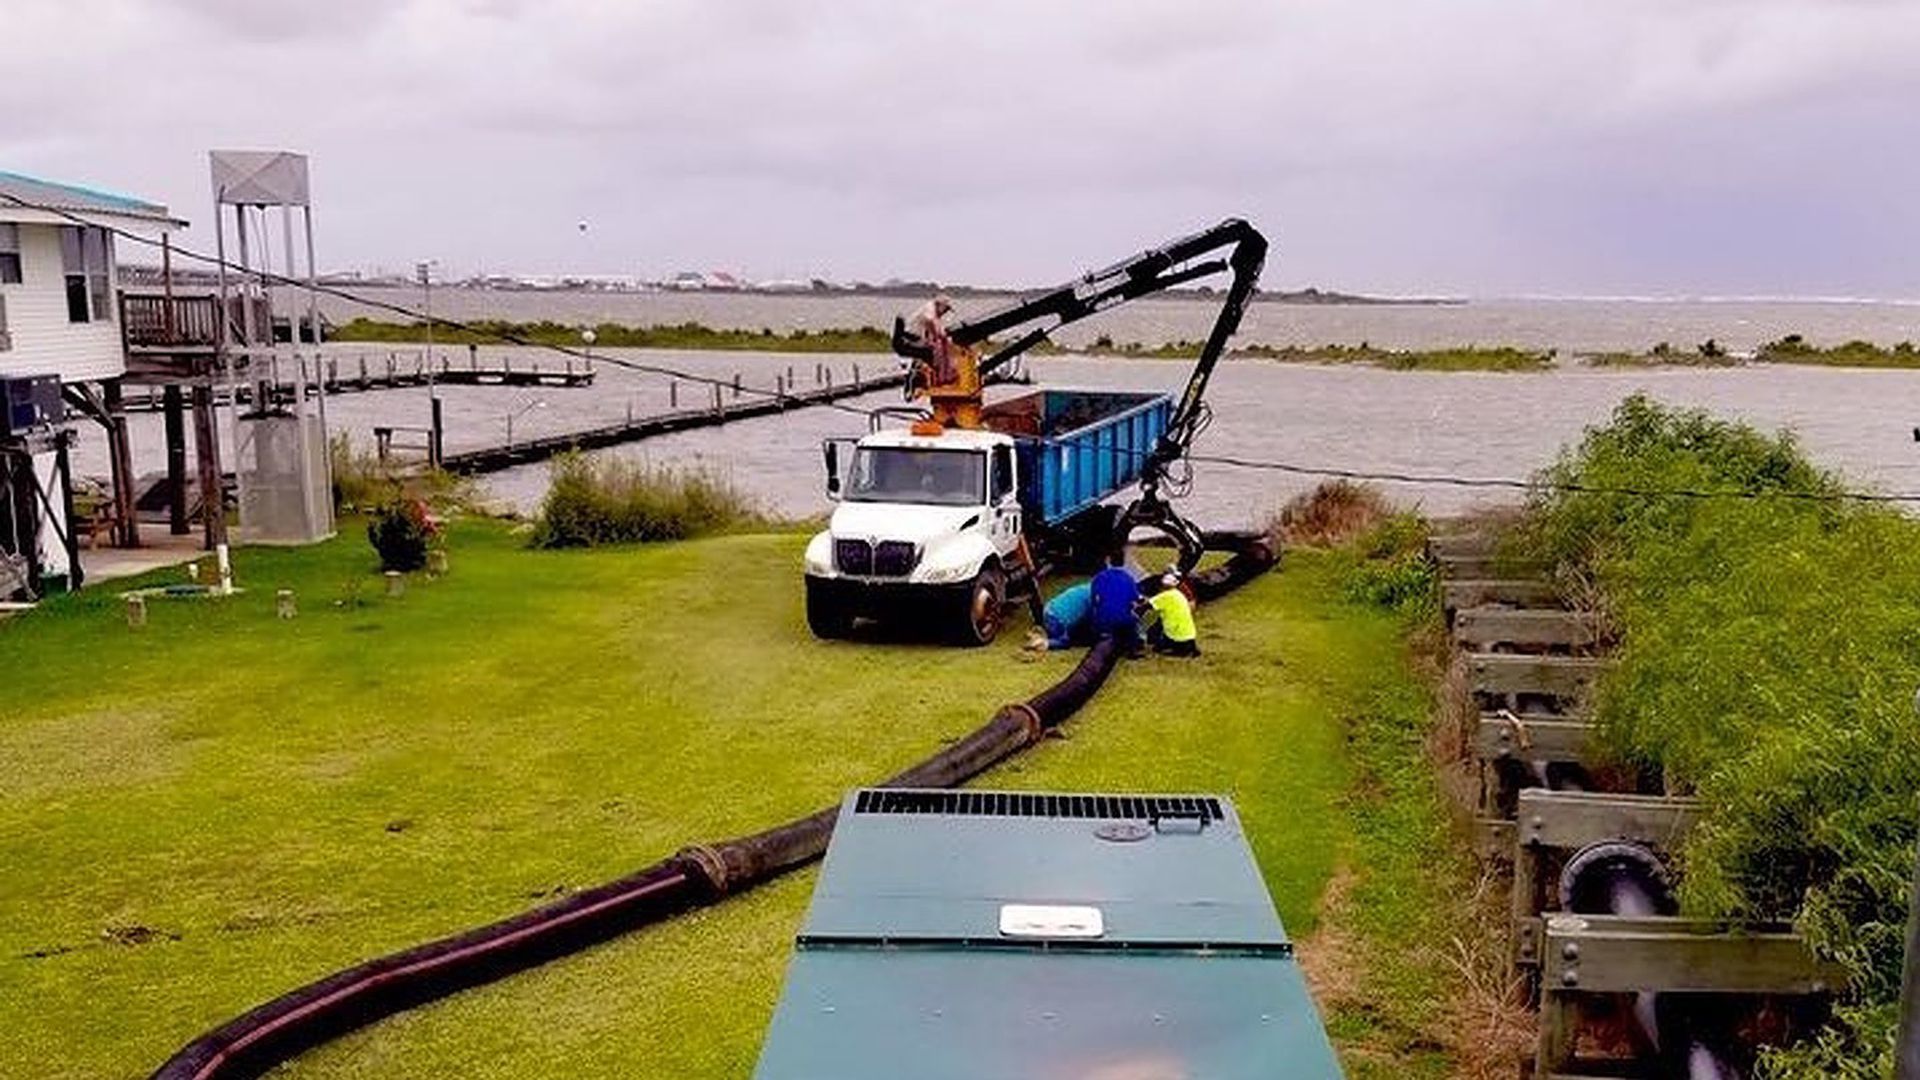 "Multiple pumps have been placed and are now operational in Grand Isle, as crews battle surge and flooding impacts" from Tropical Storm Cristobal, Louisiana authorities say.